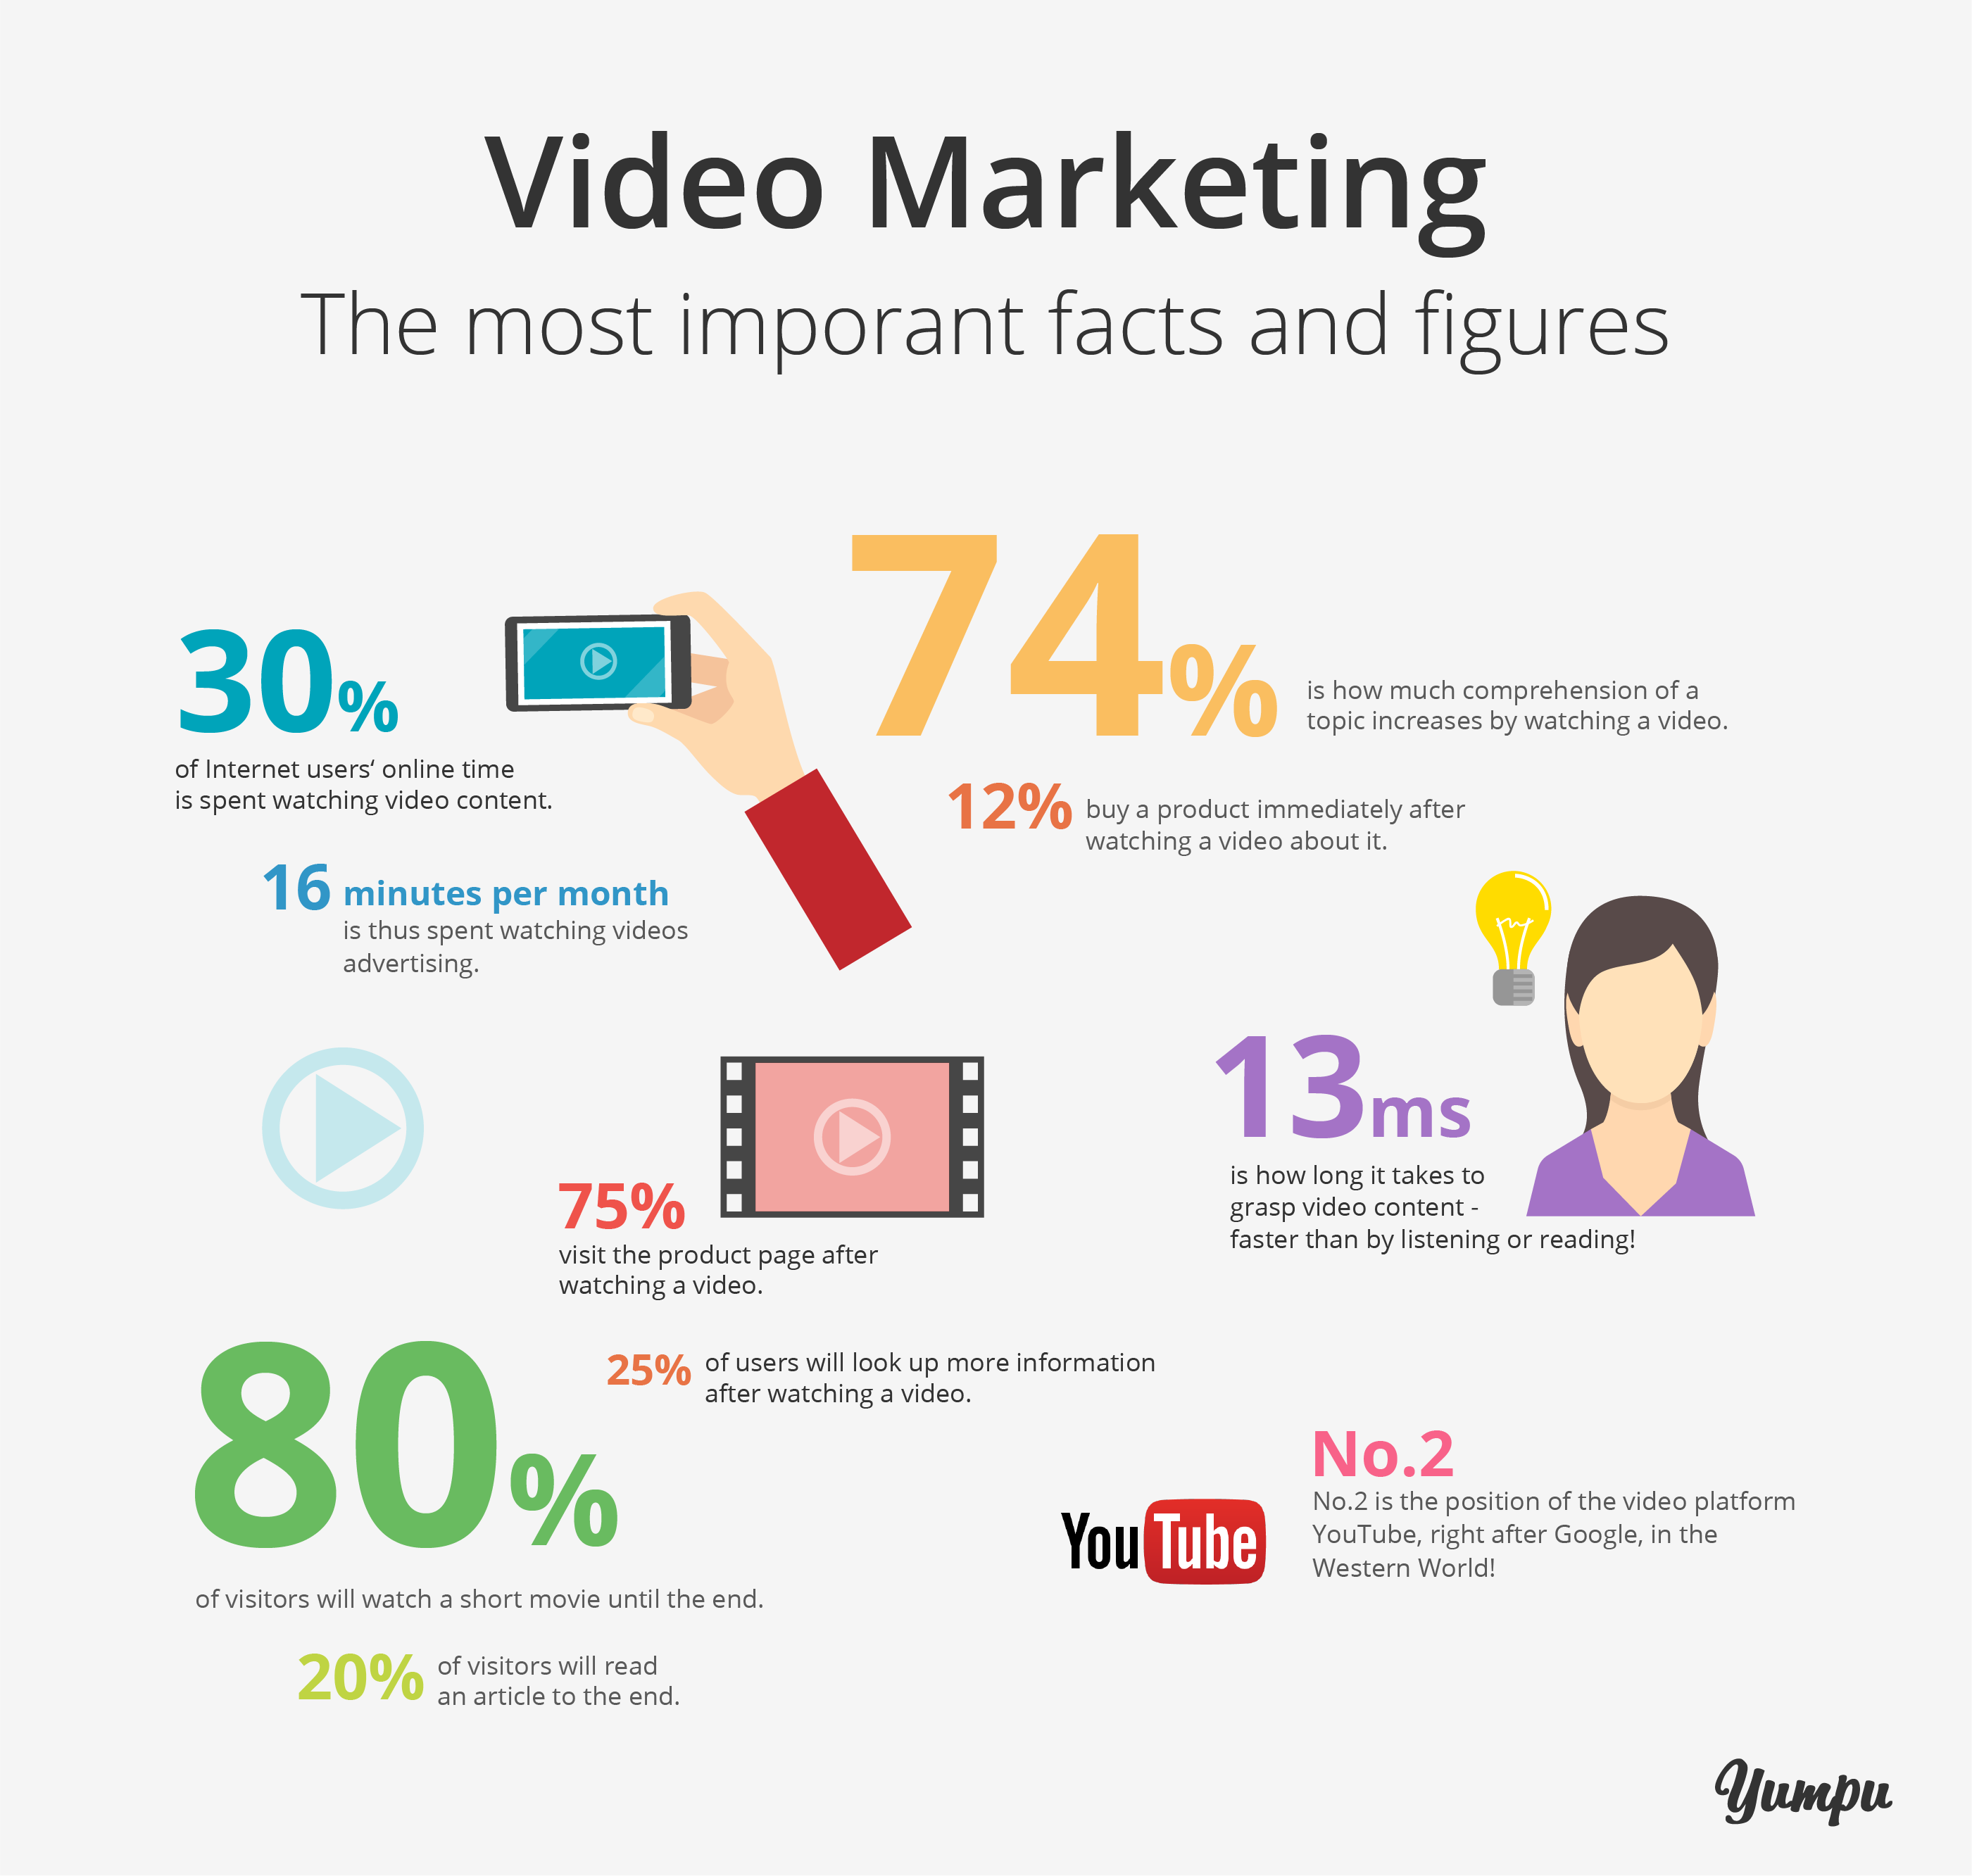 The most important facts and figures about video marketing